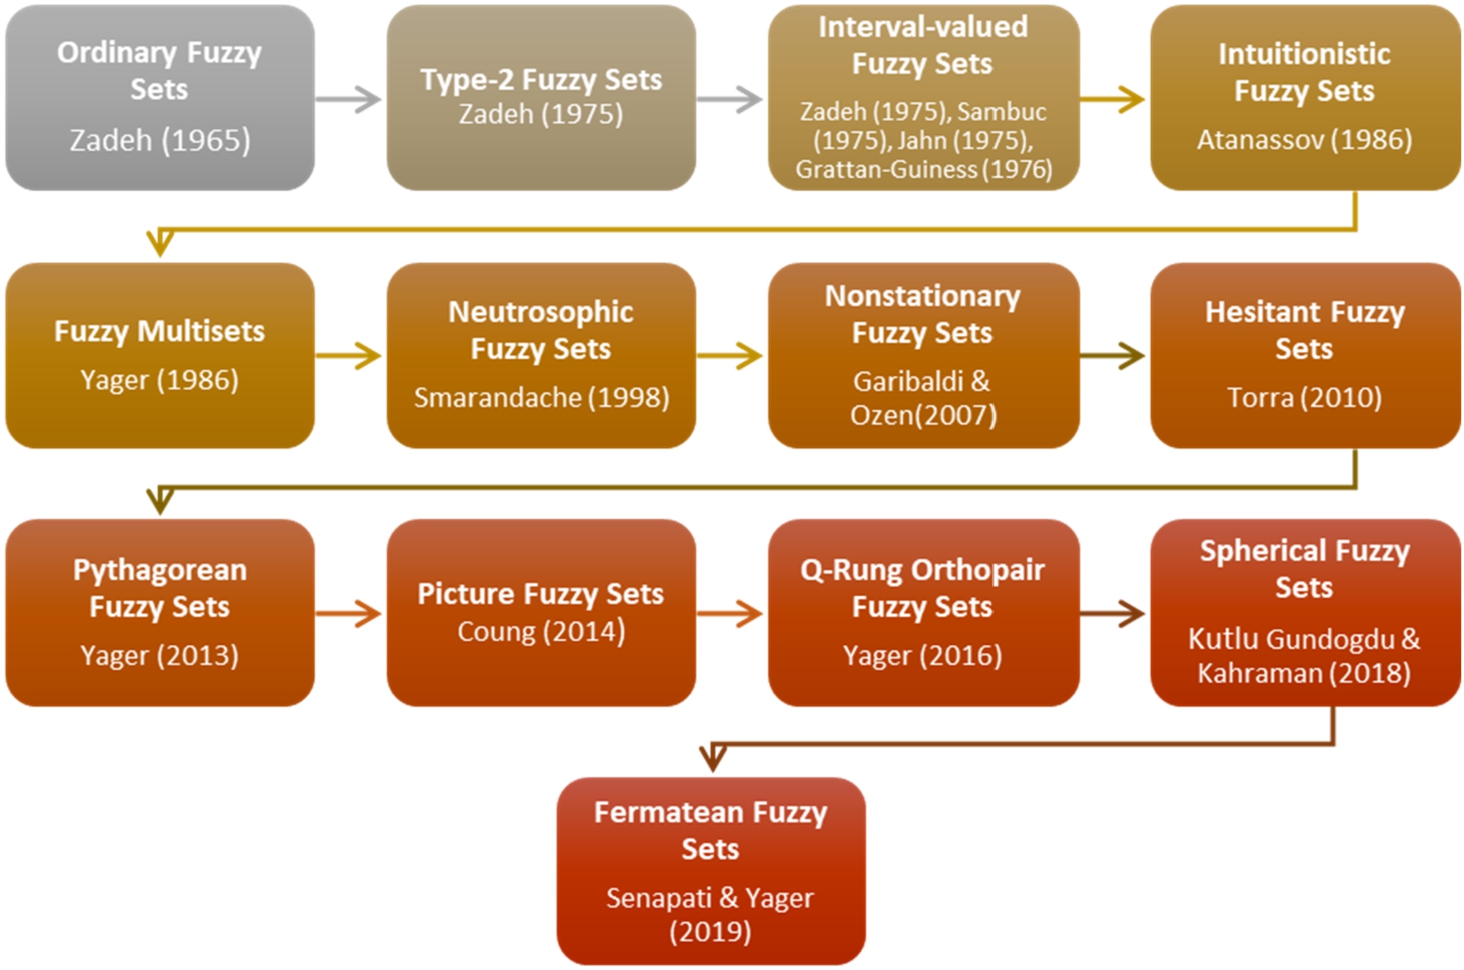 Extension of fuzzy sets.